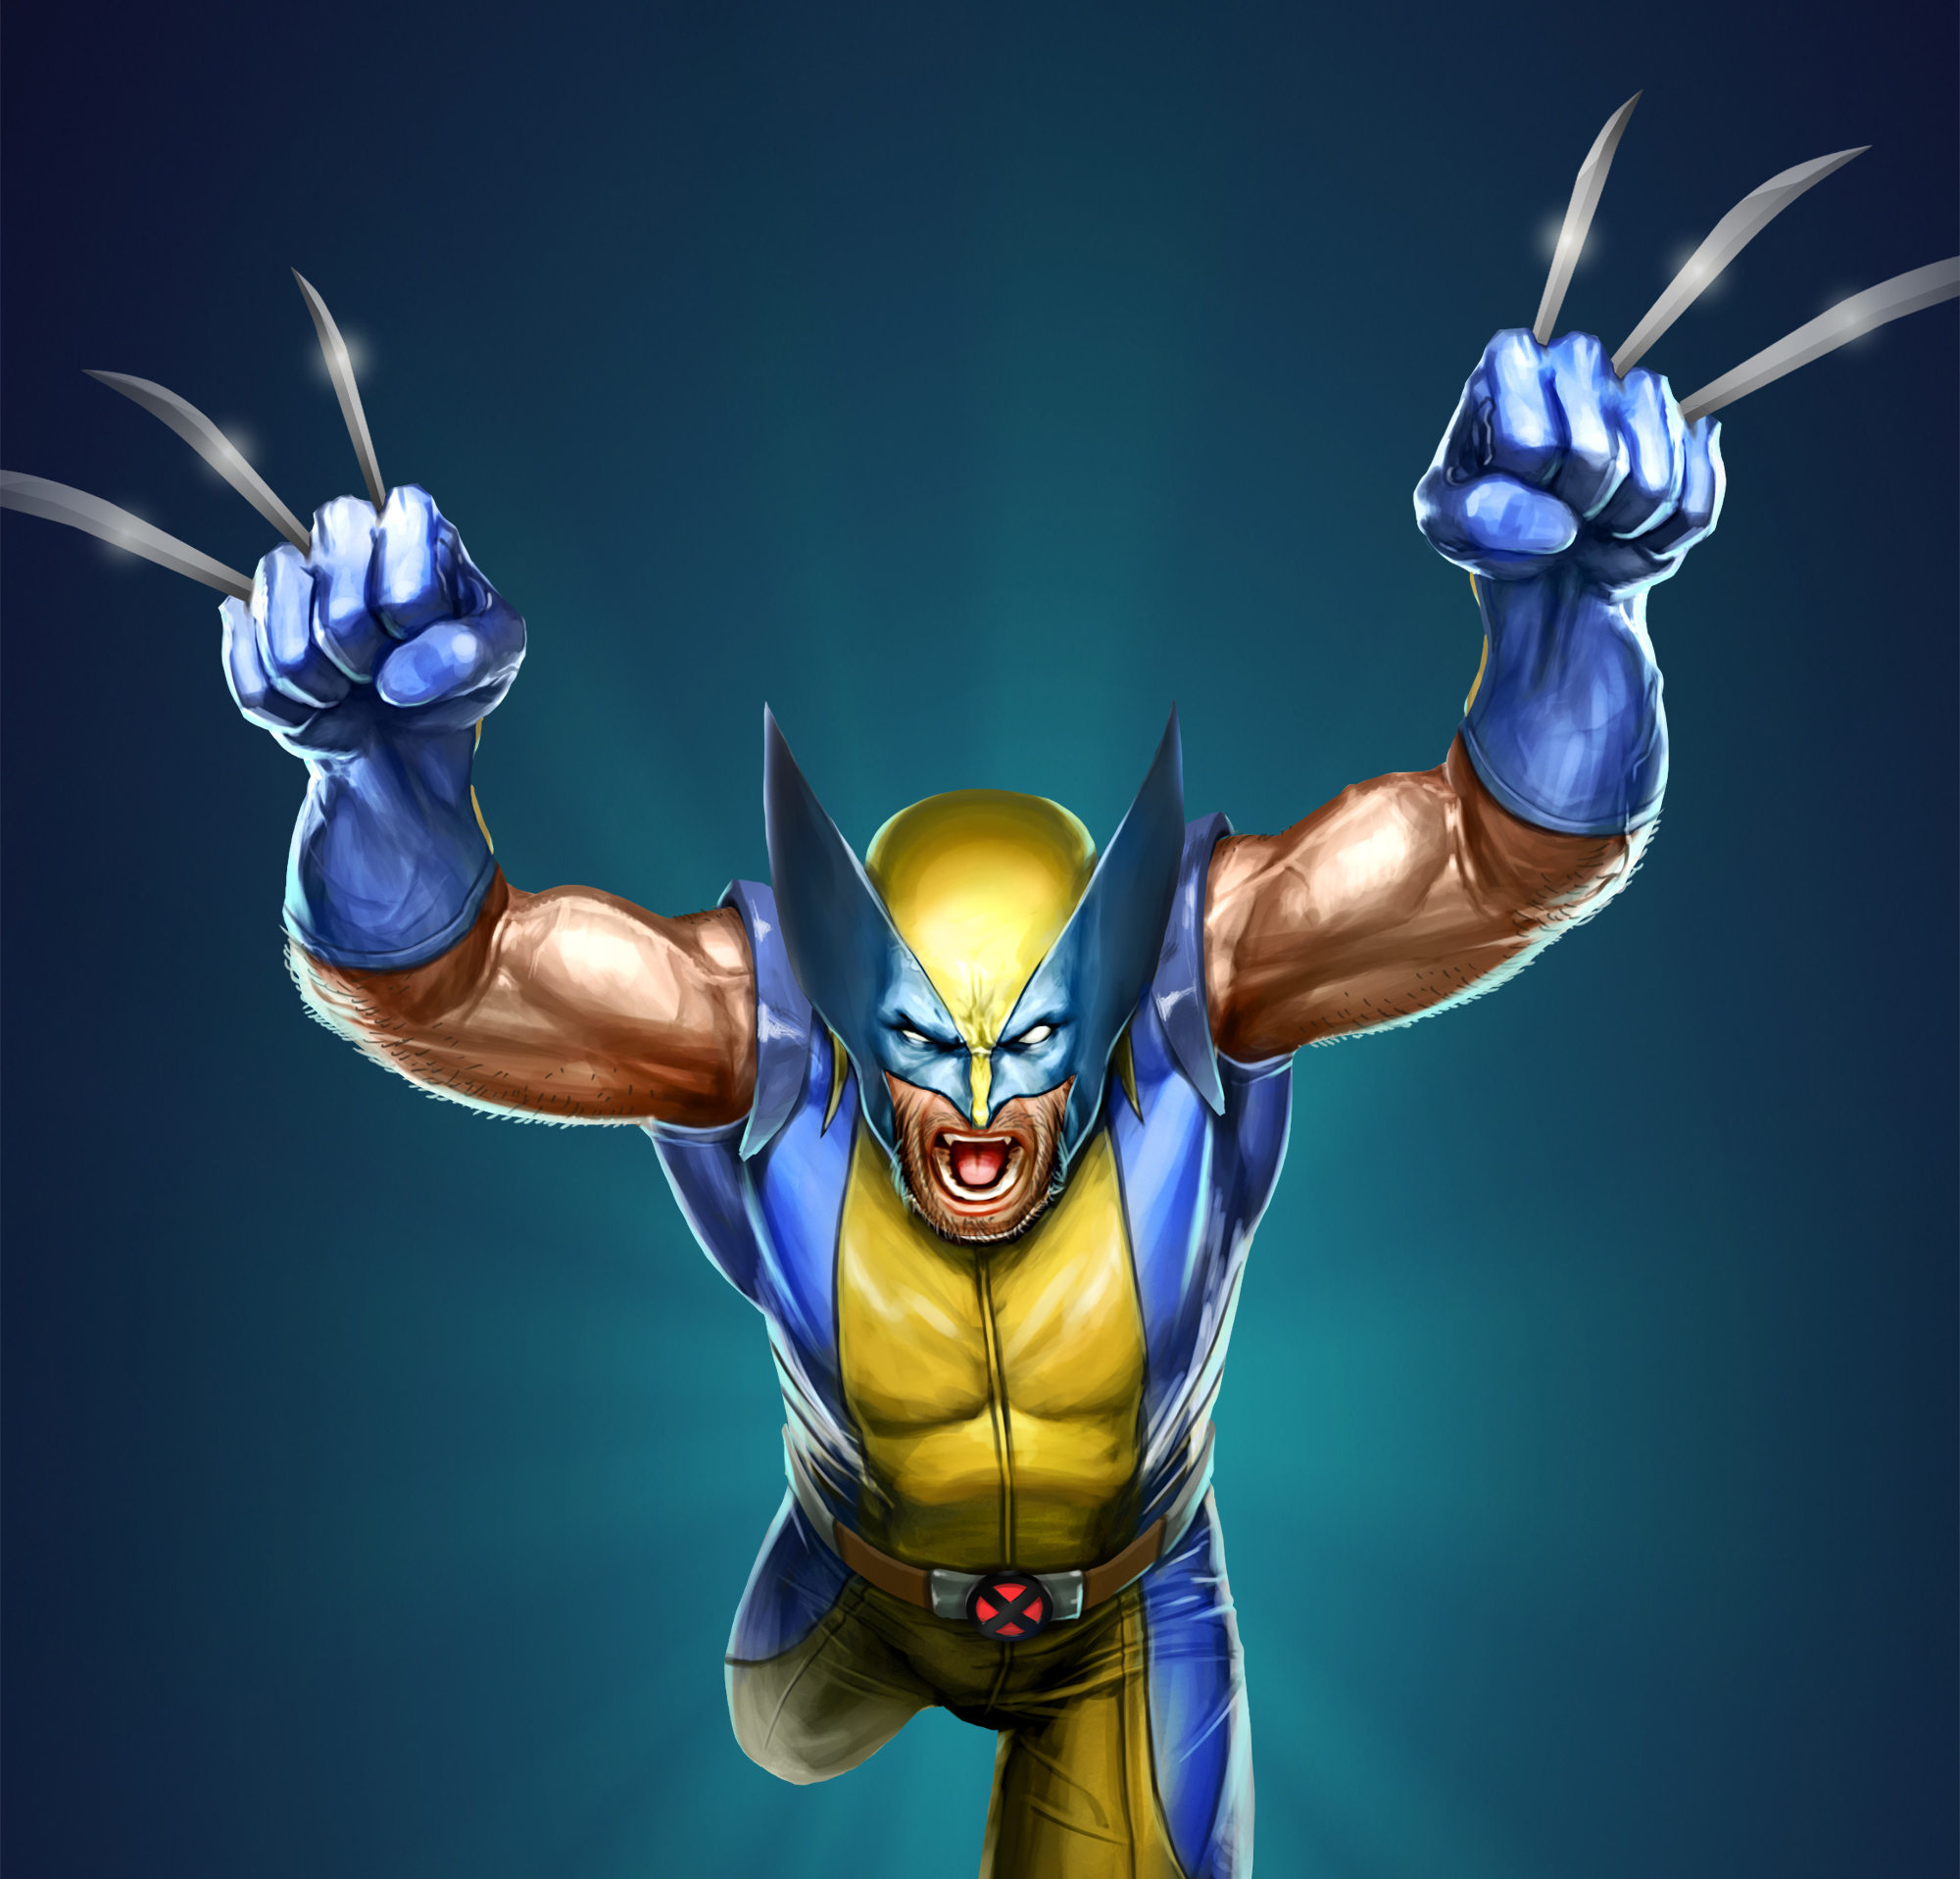 The Wolverine Marvel Artwork, HD Superheroes, 4k Wallpaper, Image, Background, Photo and Picture